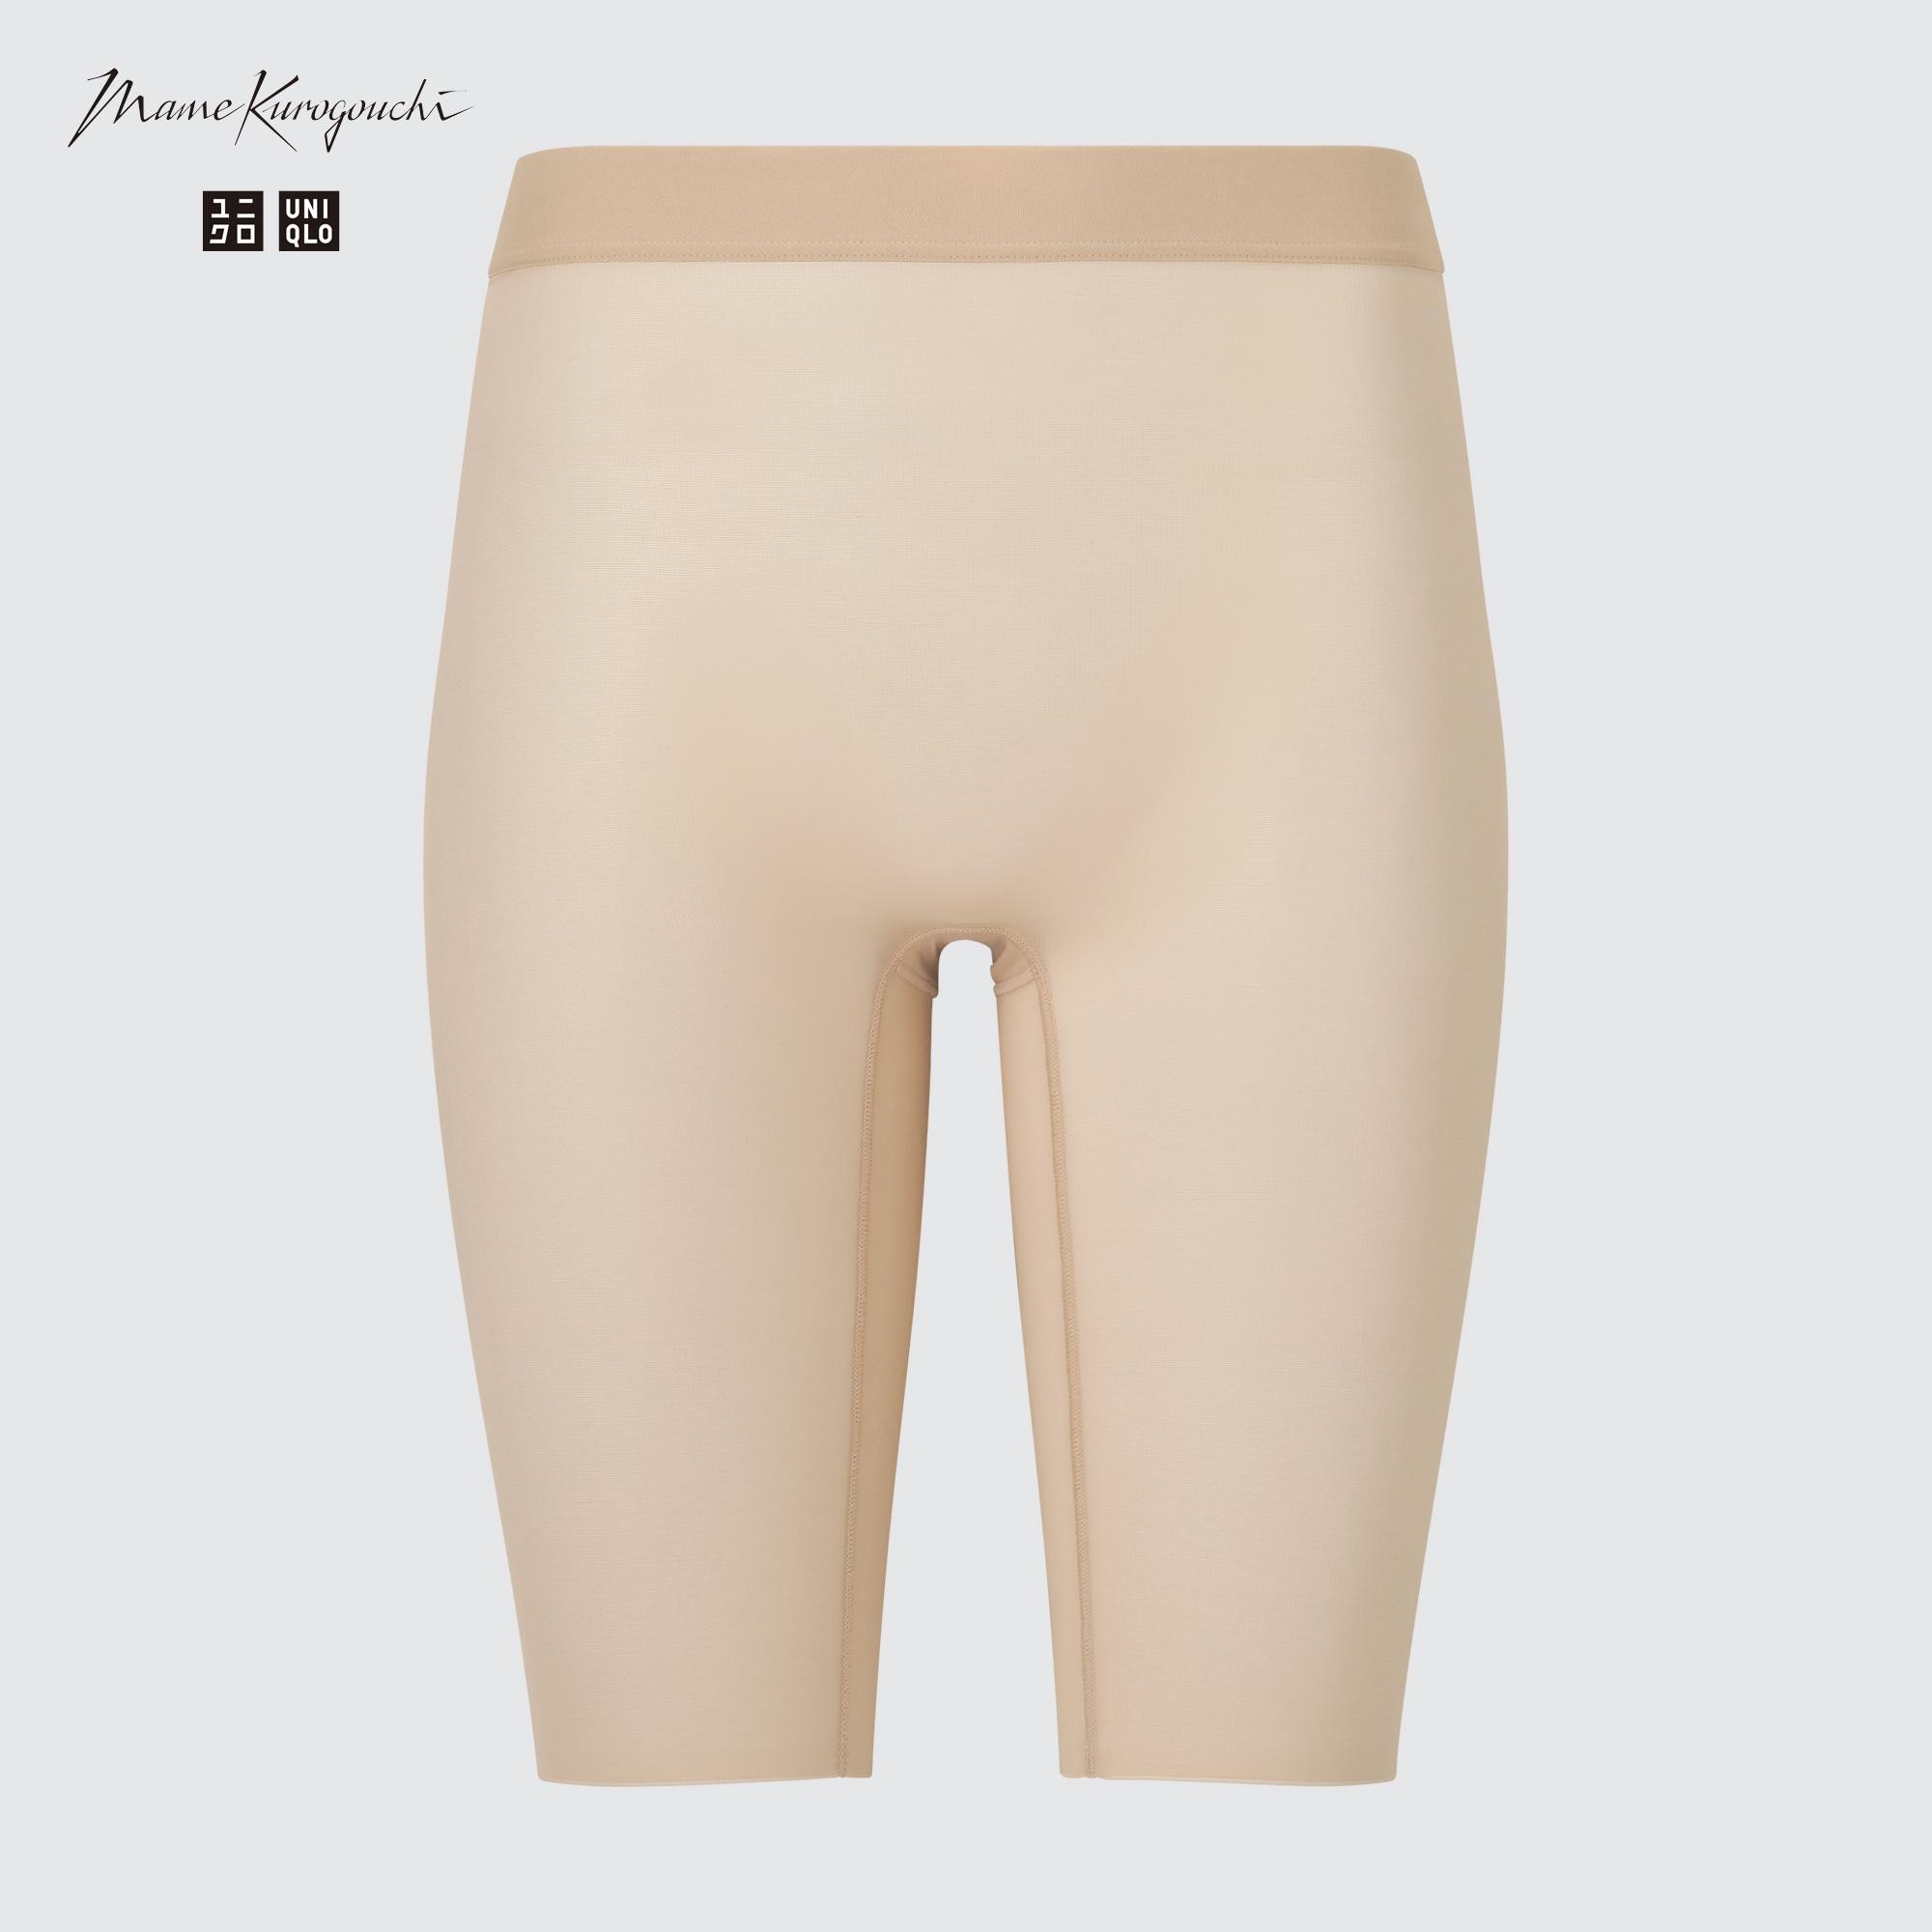 Uniqlo Spandex Shapewear For Women: Buy Online at Best Price in